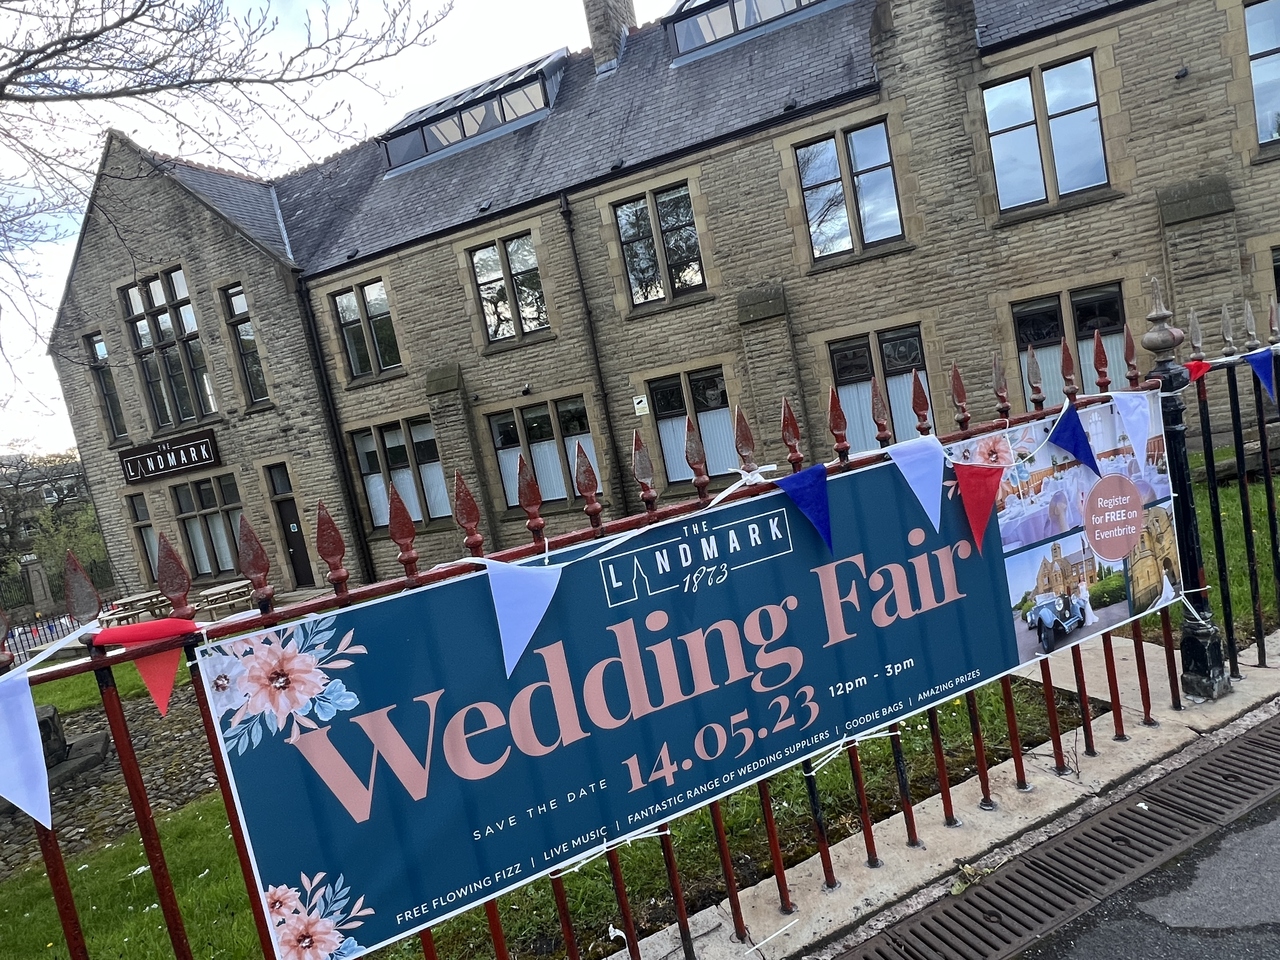 Summer Wedding Fair to take place at The Landmark this weekend with great prizes up for grabs